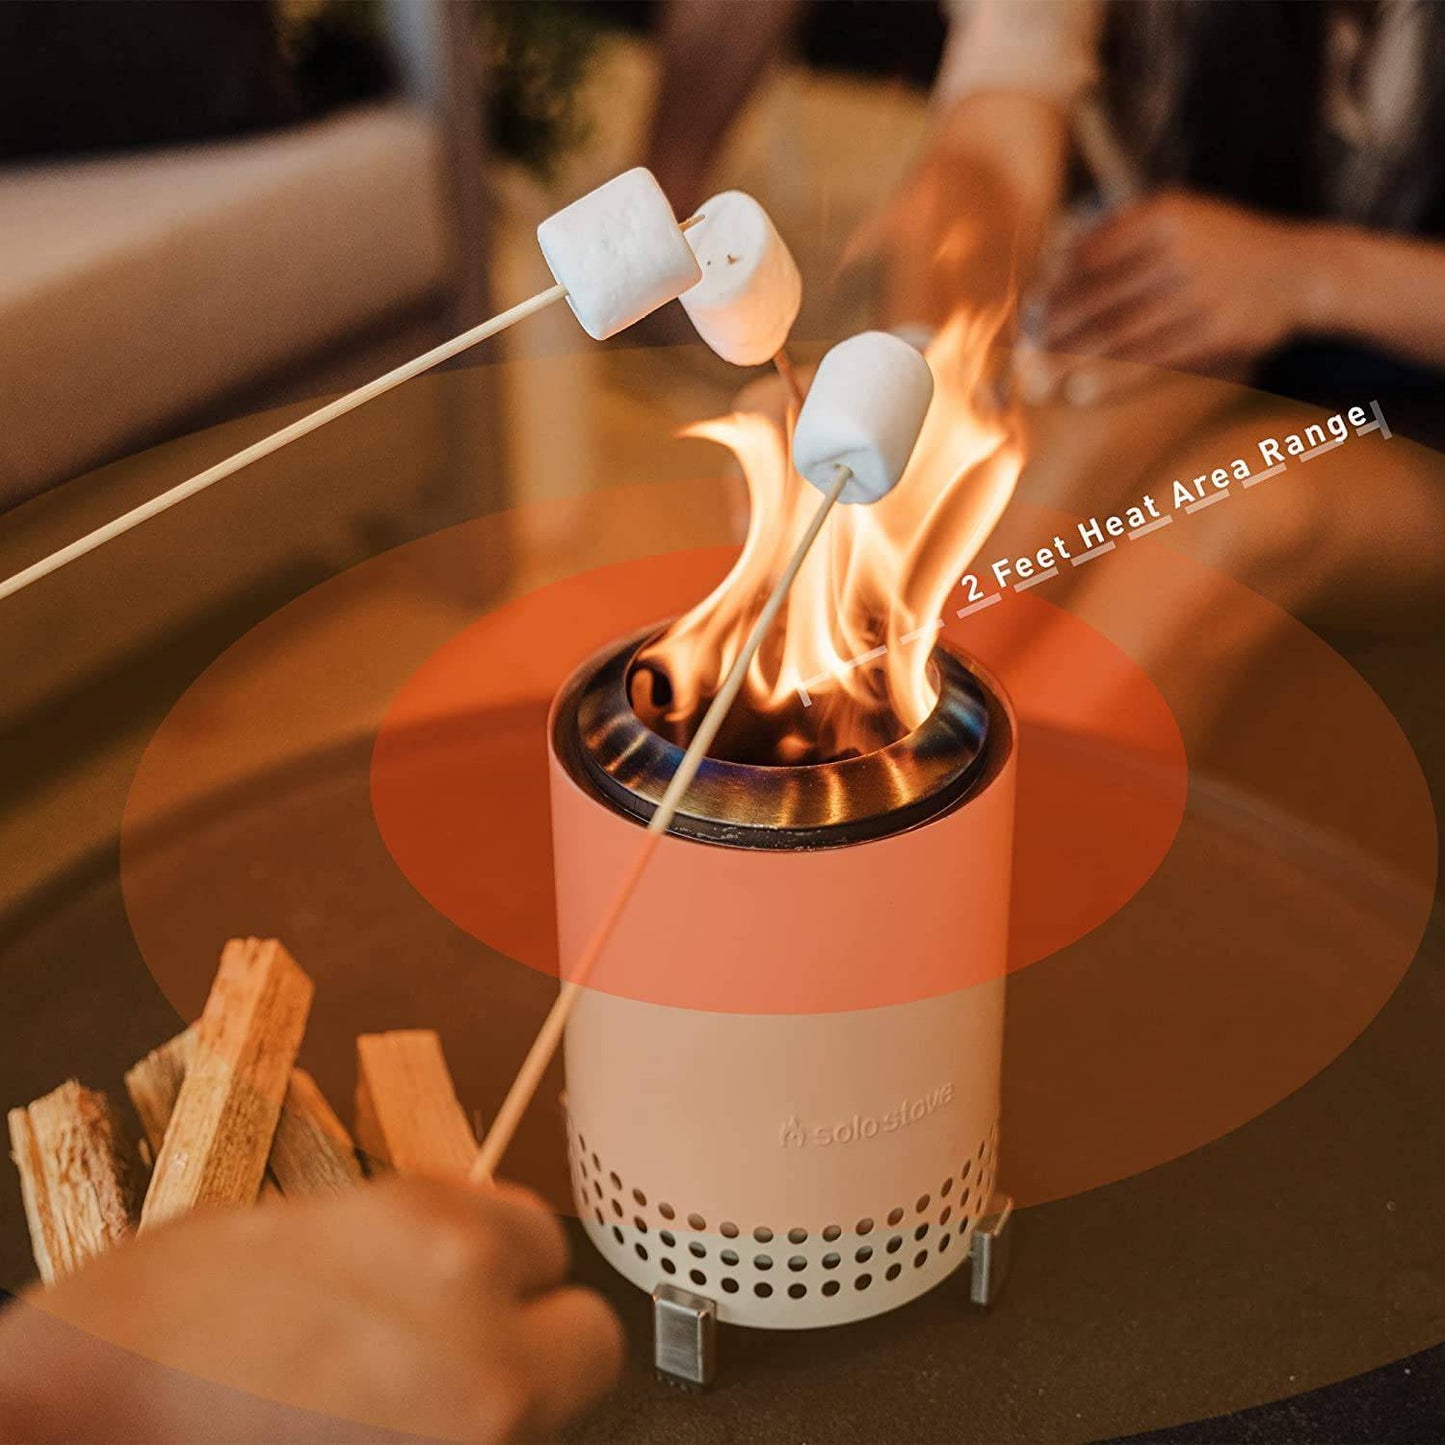 COOLBABY Tabletop Fire Pit with Stand | Low Smoke Outdoor Mini Fire for Urban & Suburbs | Fueled by Pellets or Wood, Safe Burning, Stainless Steel, with Travel Bag,16*13cm - COOL BABY